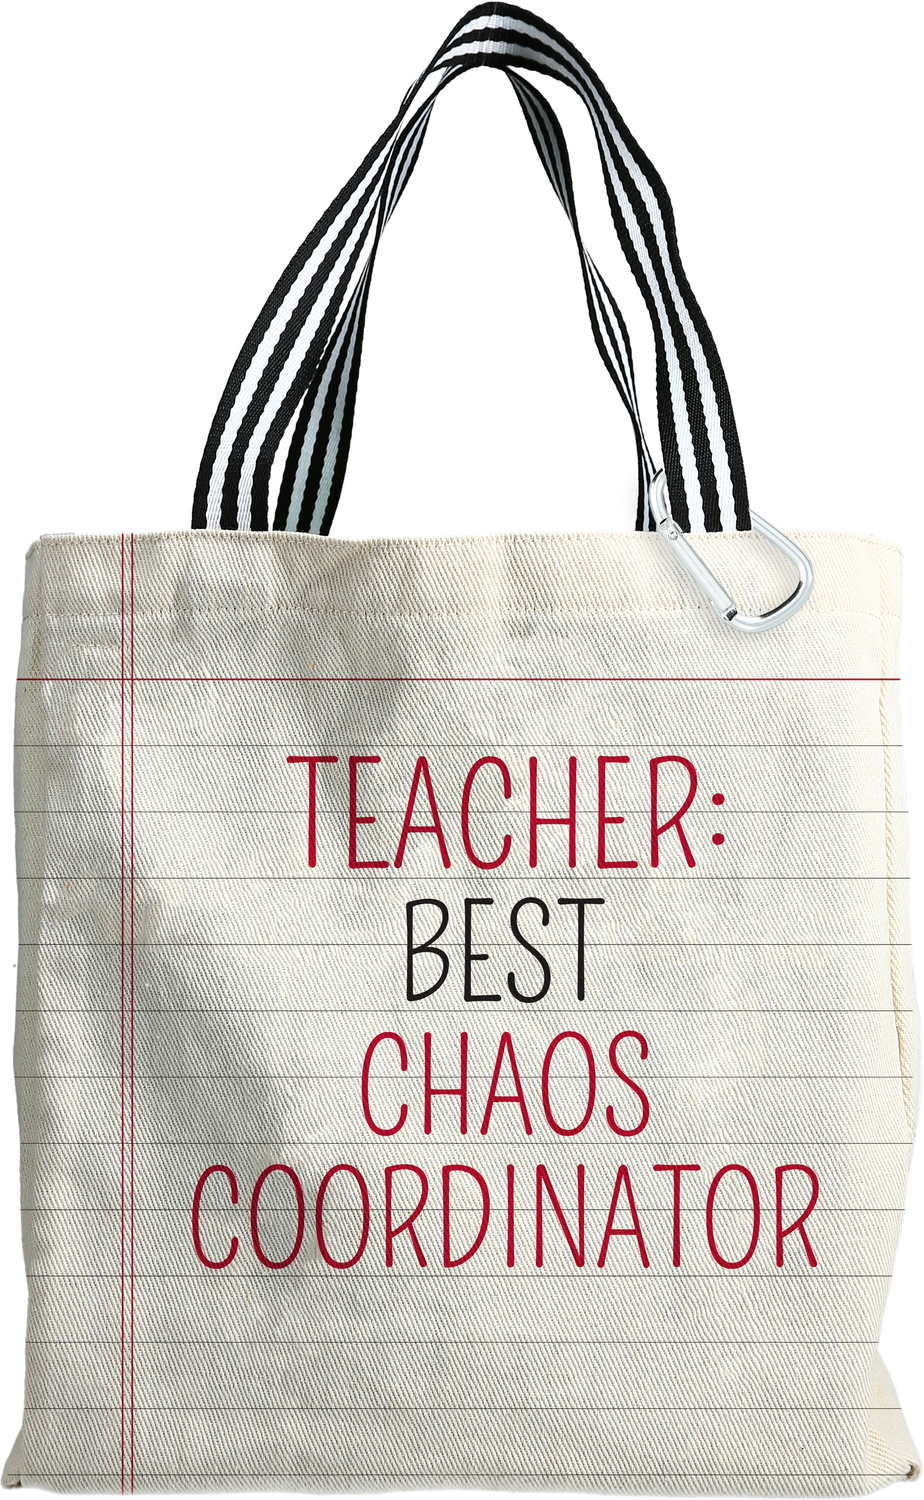 Chaos Coordinator by Teachable Moments - Chaos Coordinator - 100% Cotton Twill Gift Bag